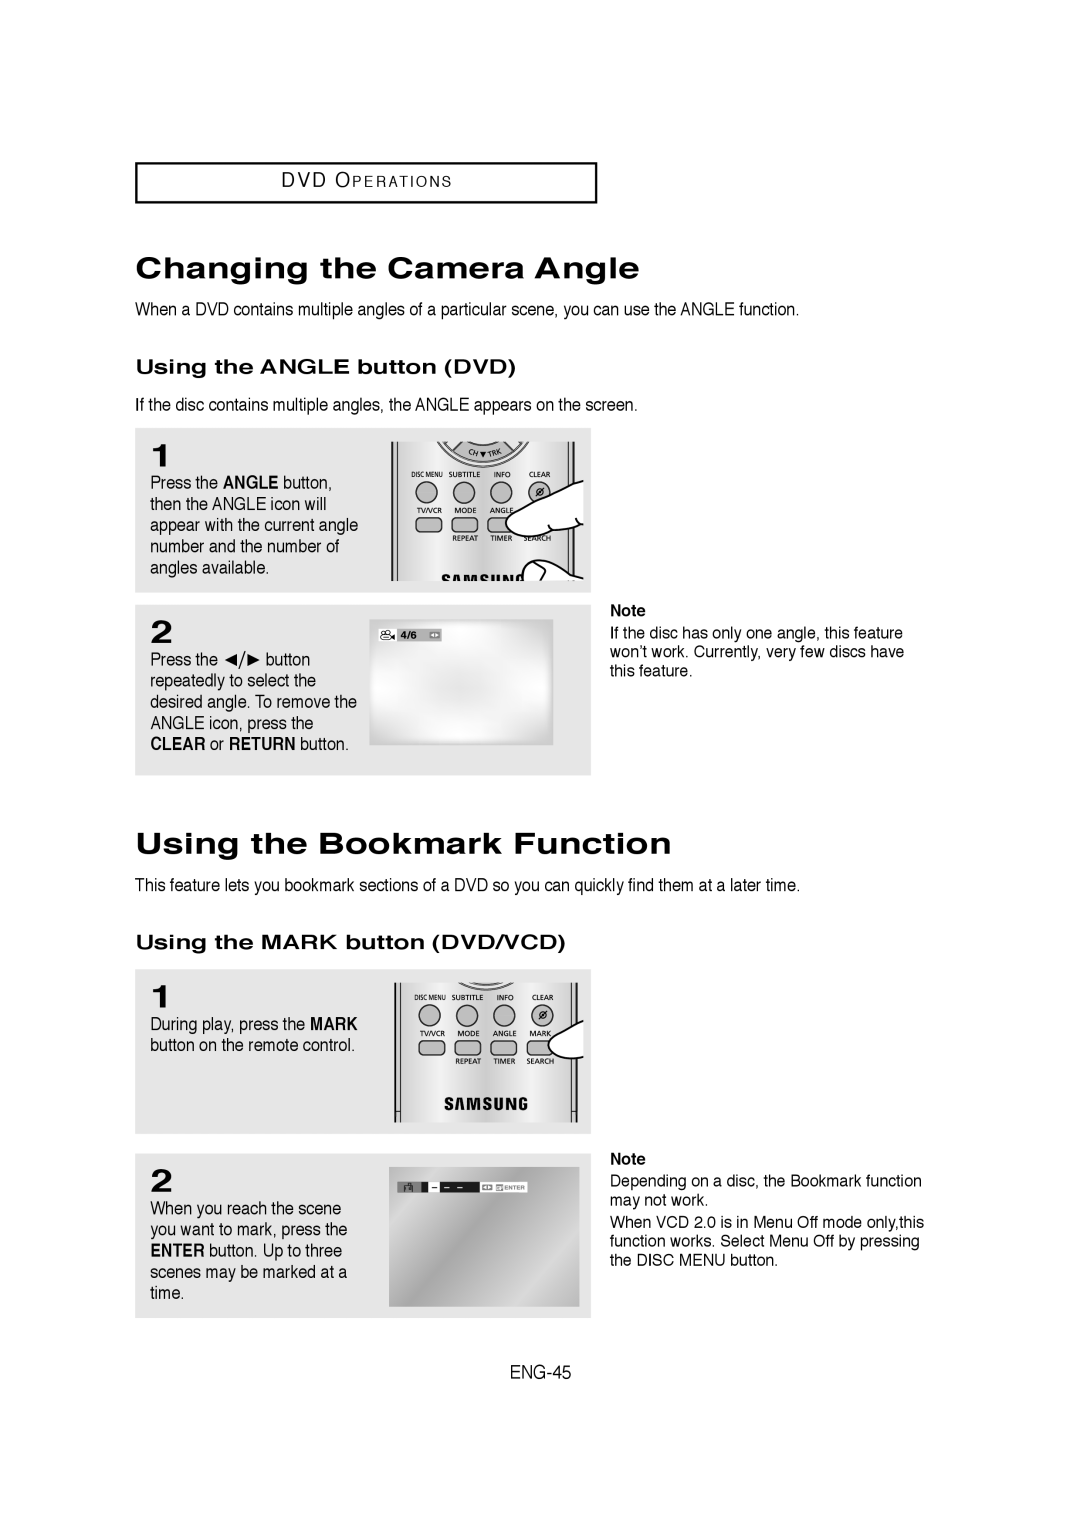 Samsung AK68-01304A, V6700-XAC Changing the Camera Angle, Using the Bookmark Function, Using the ANGLE button DVD 